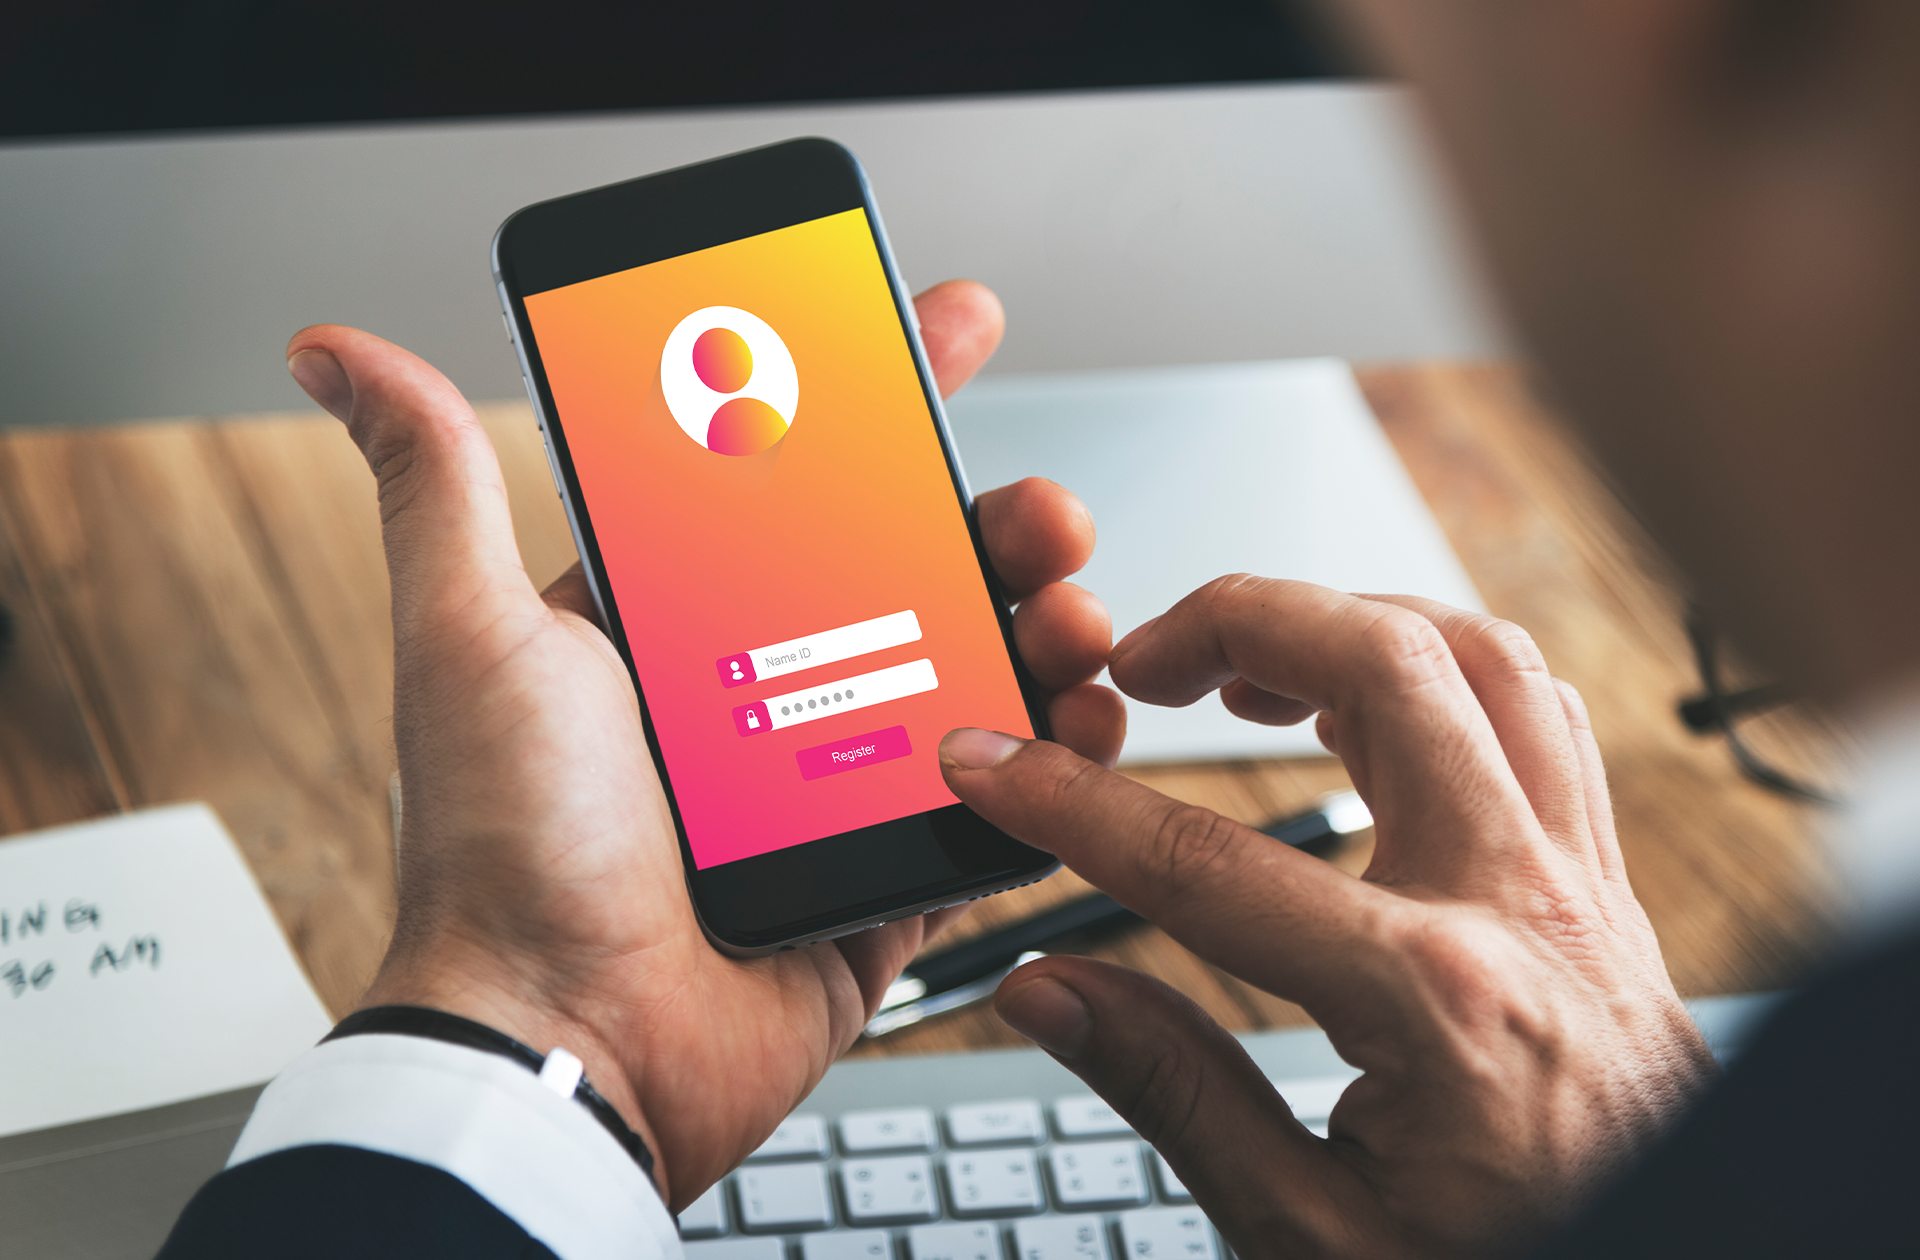 One of the most effective ways to strengthen your company's security is by implementing two-factor authentication (2FA)